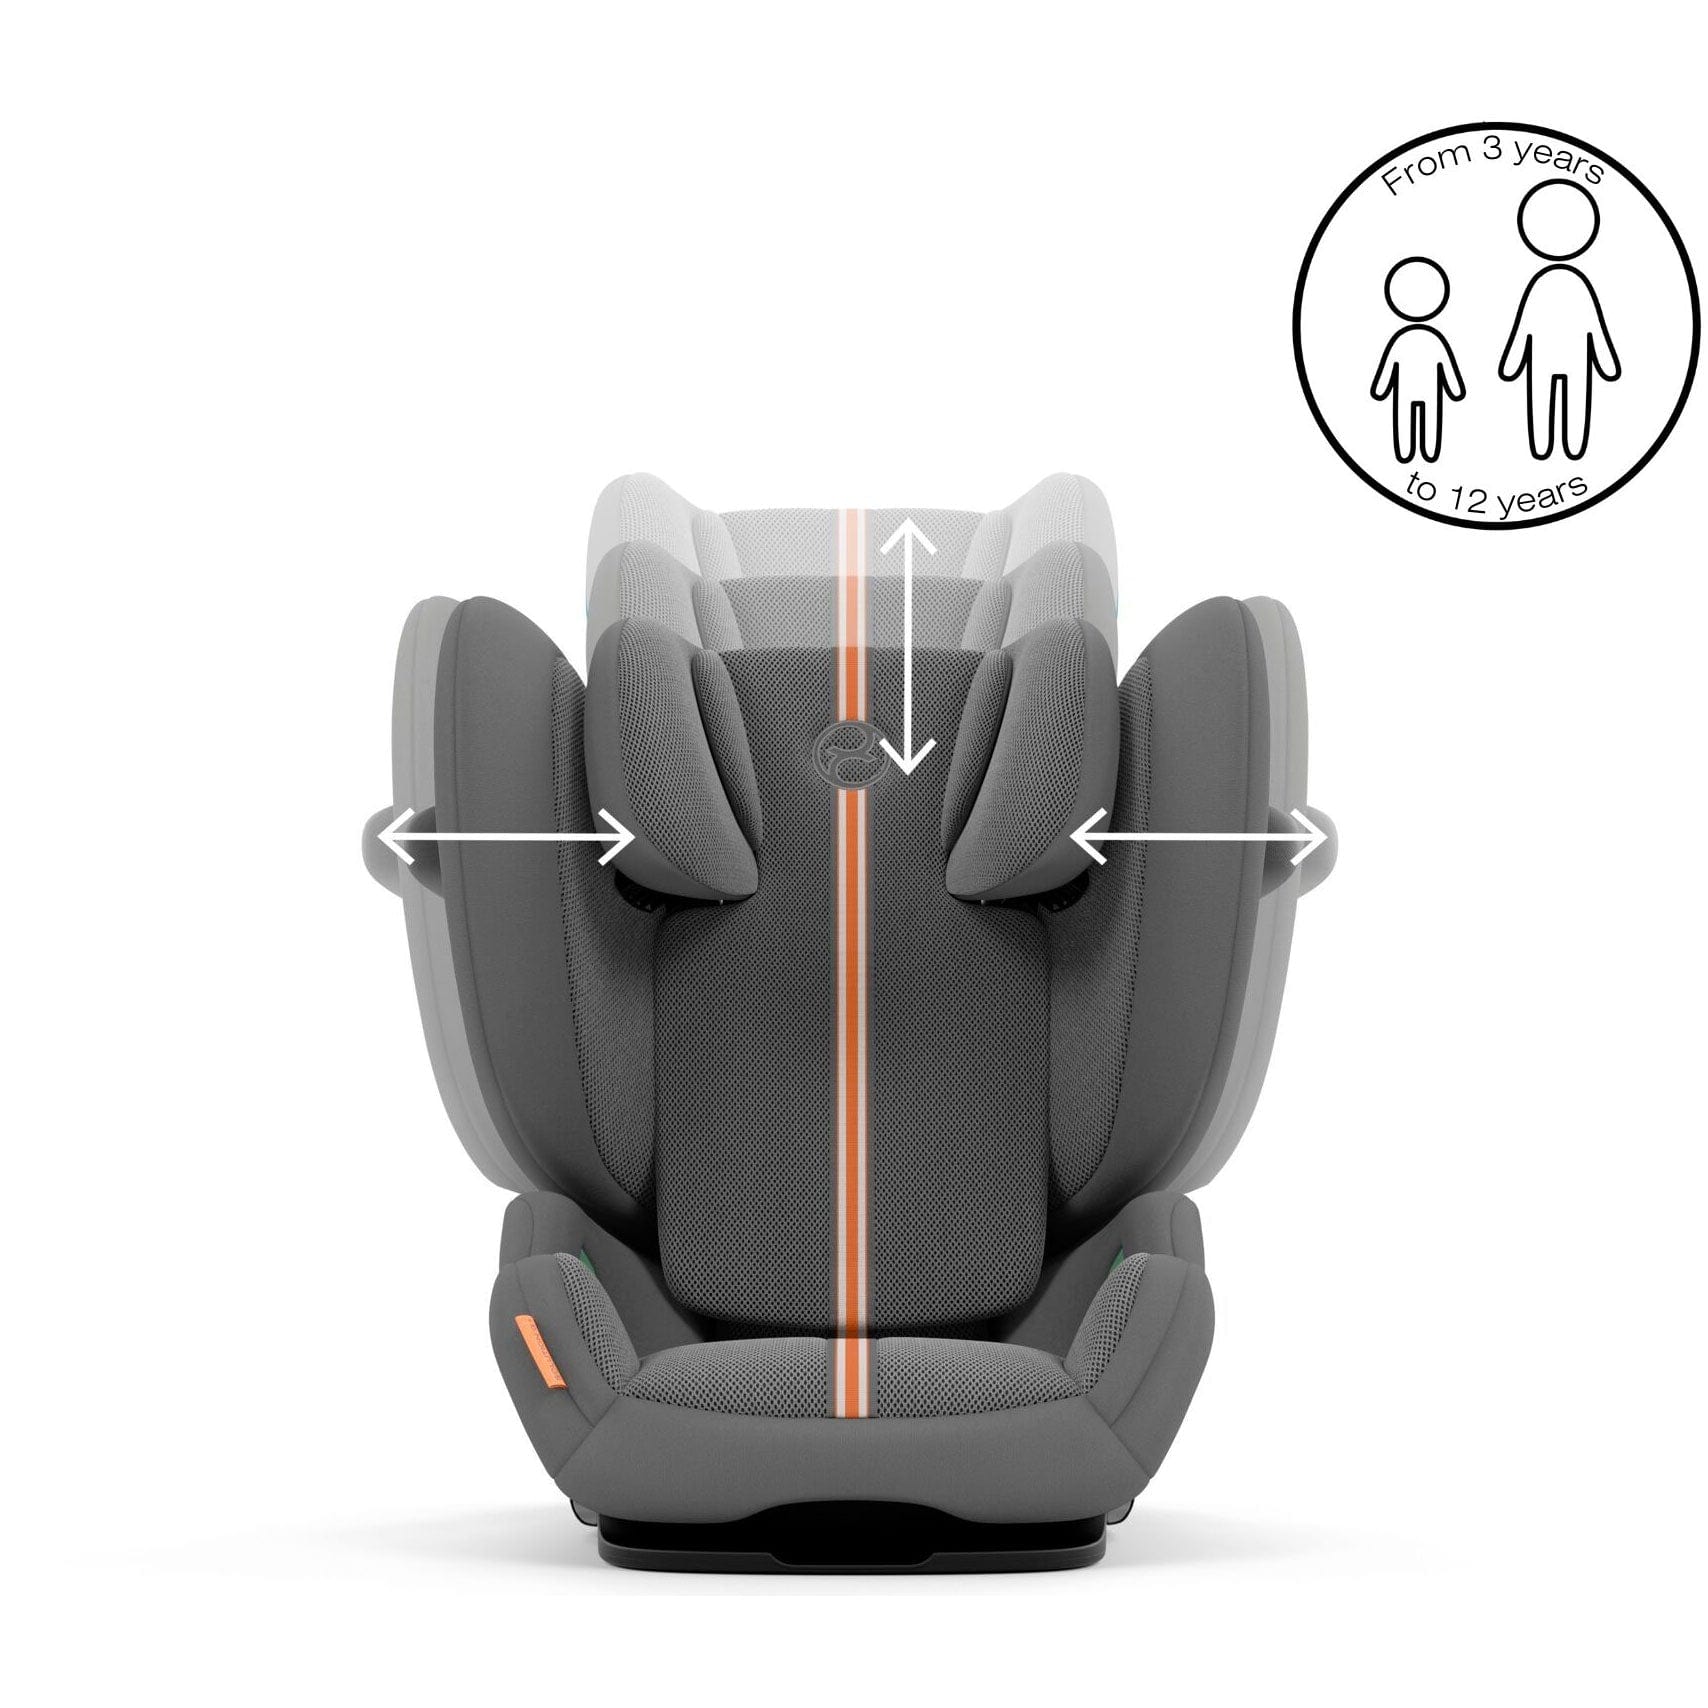 Cybex highback booster seats Cybex Solution G i-Fix Plus Highback Booster in Lava Grey 523001101